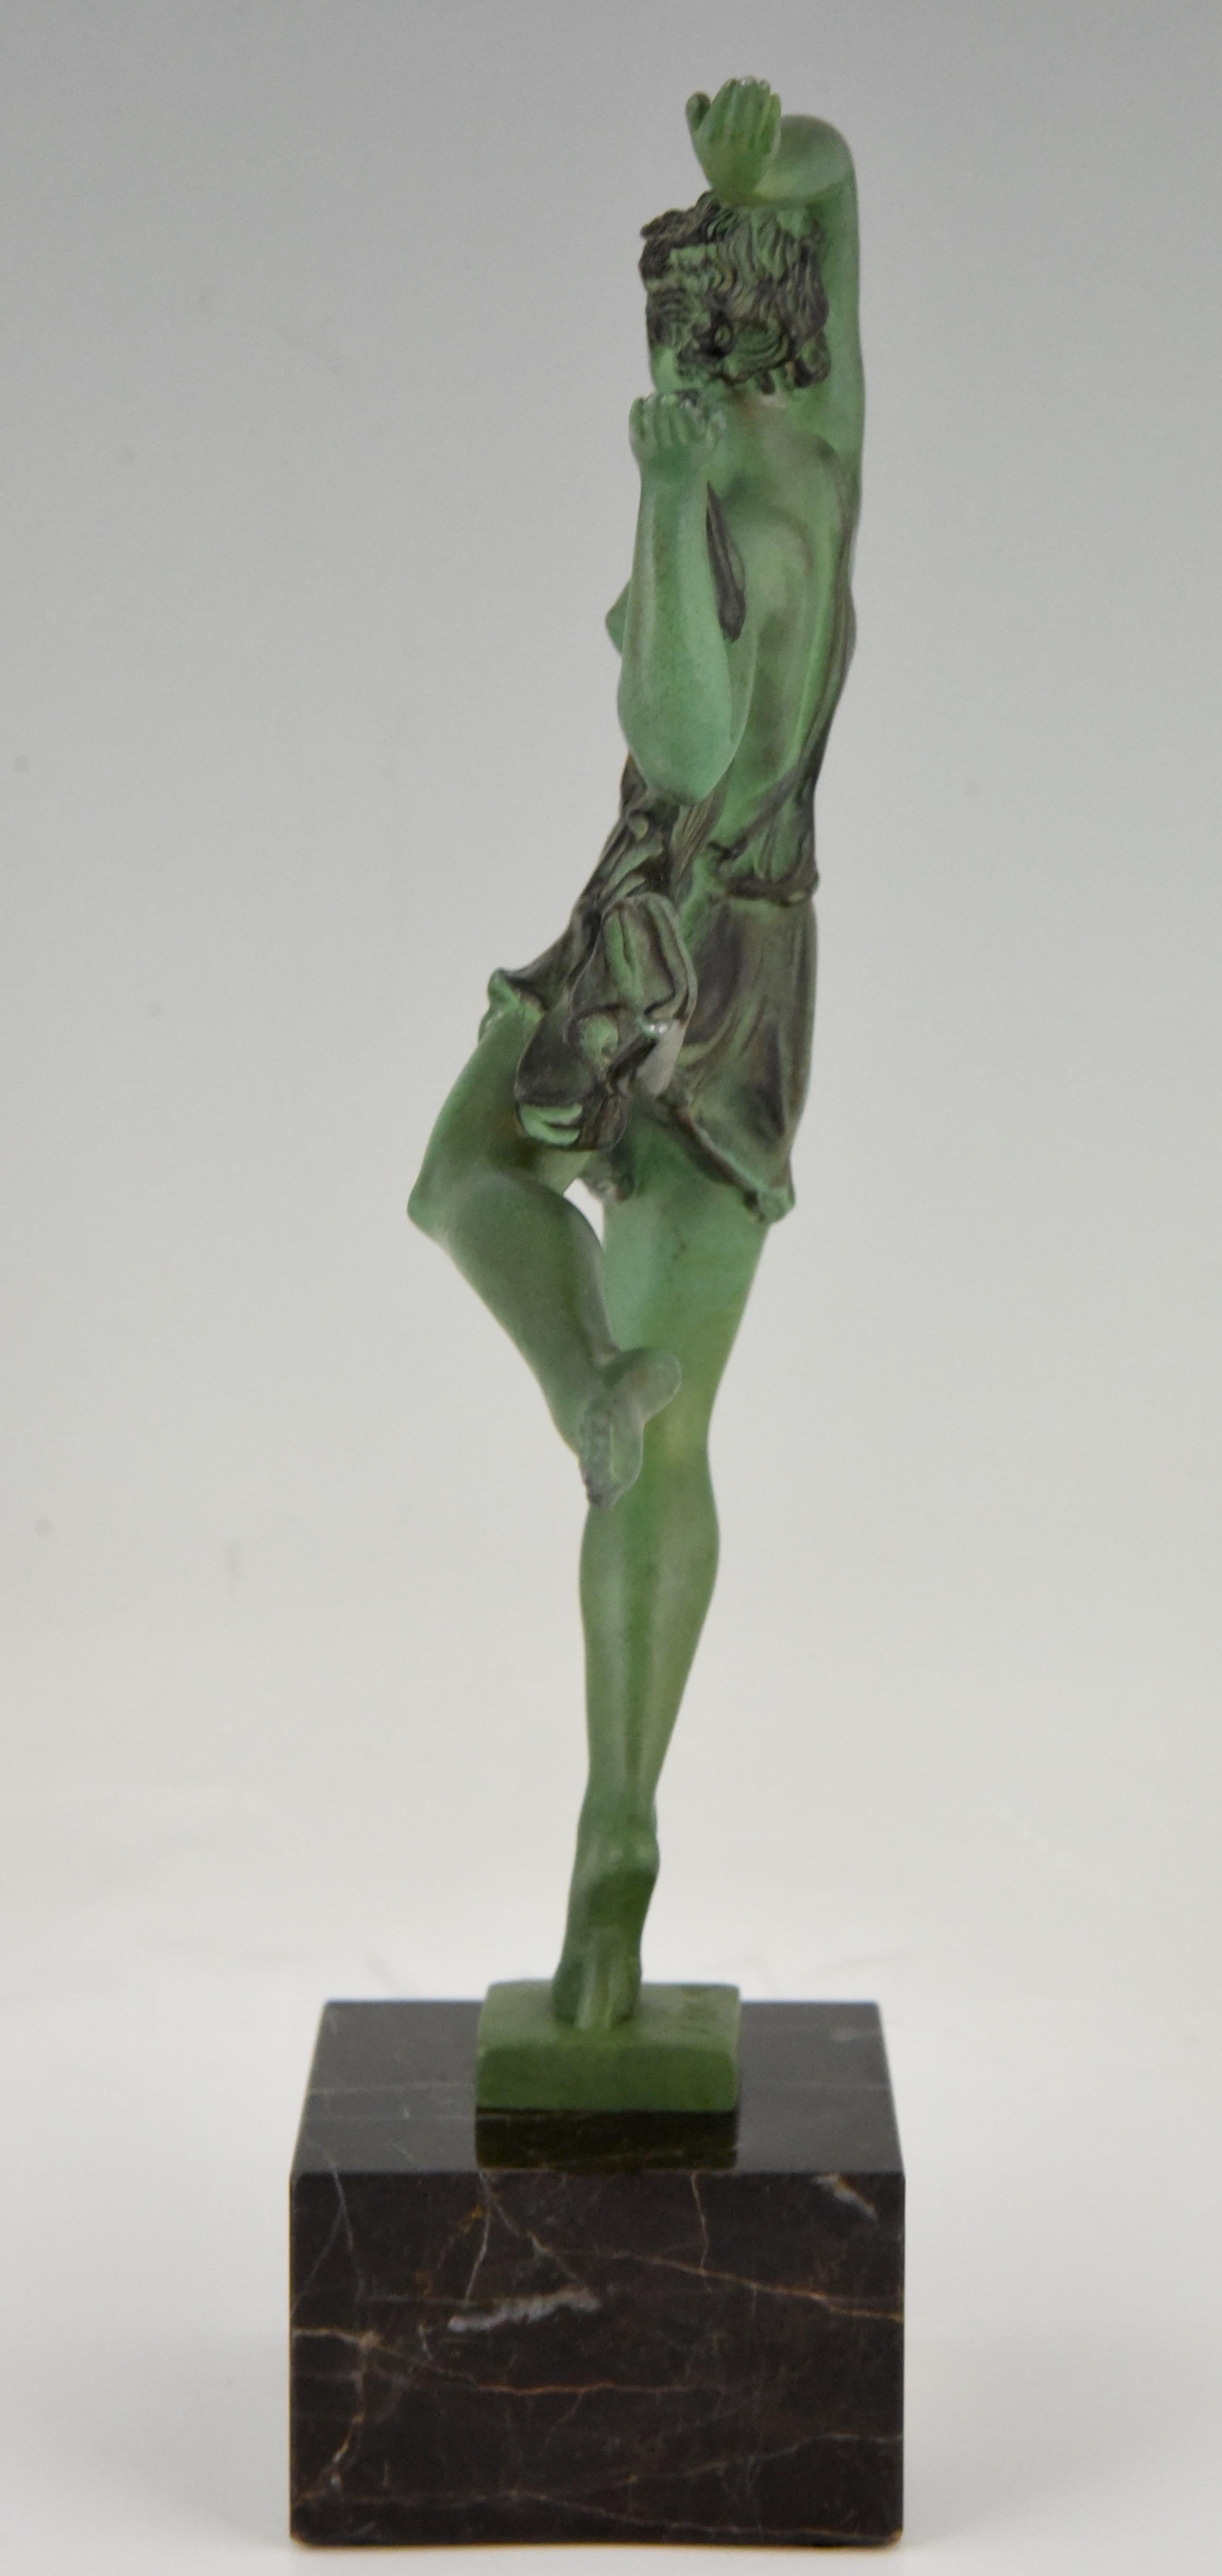 20th Century Art Deco Sculpture of a Female Dancer Fayral Le Faguays for Max Le Verrier, 1930